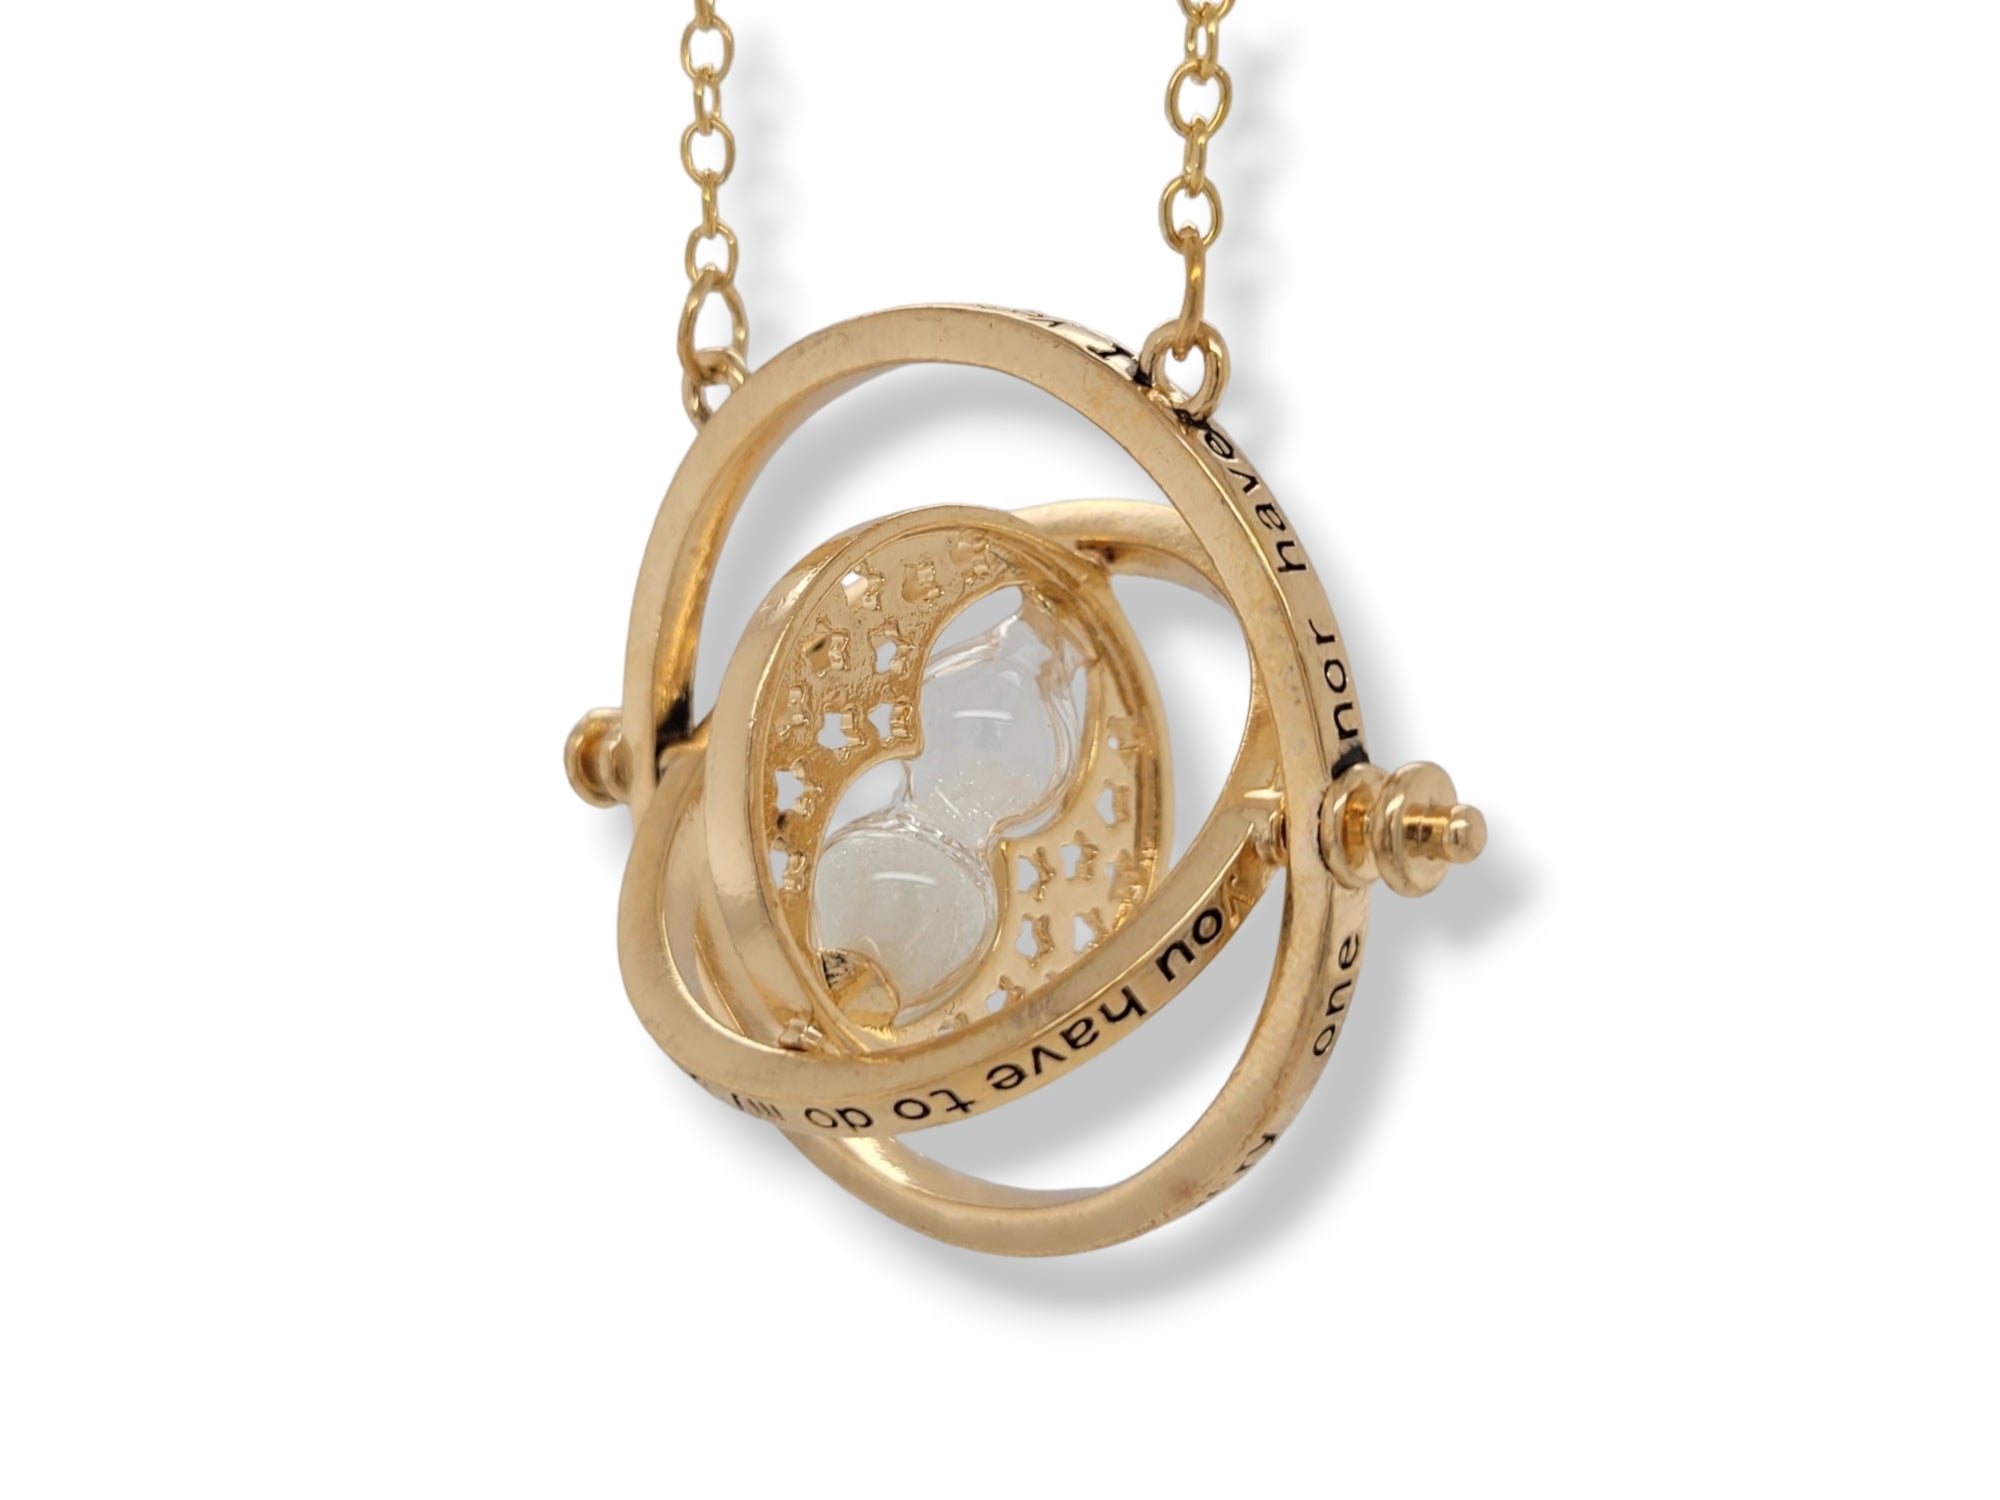 White Hourglass Time Turning Necklace